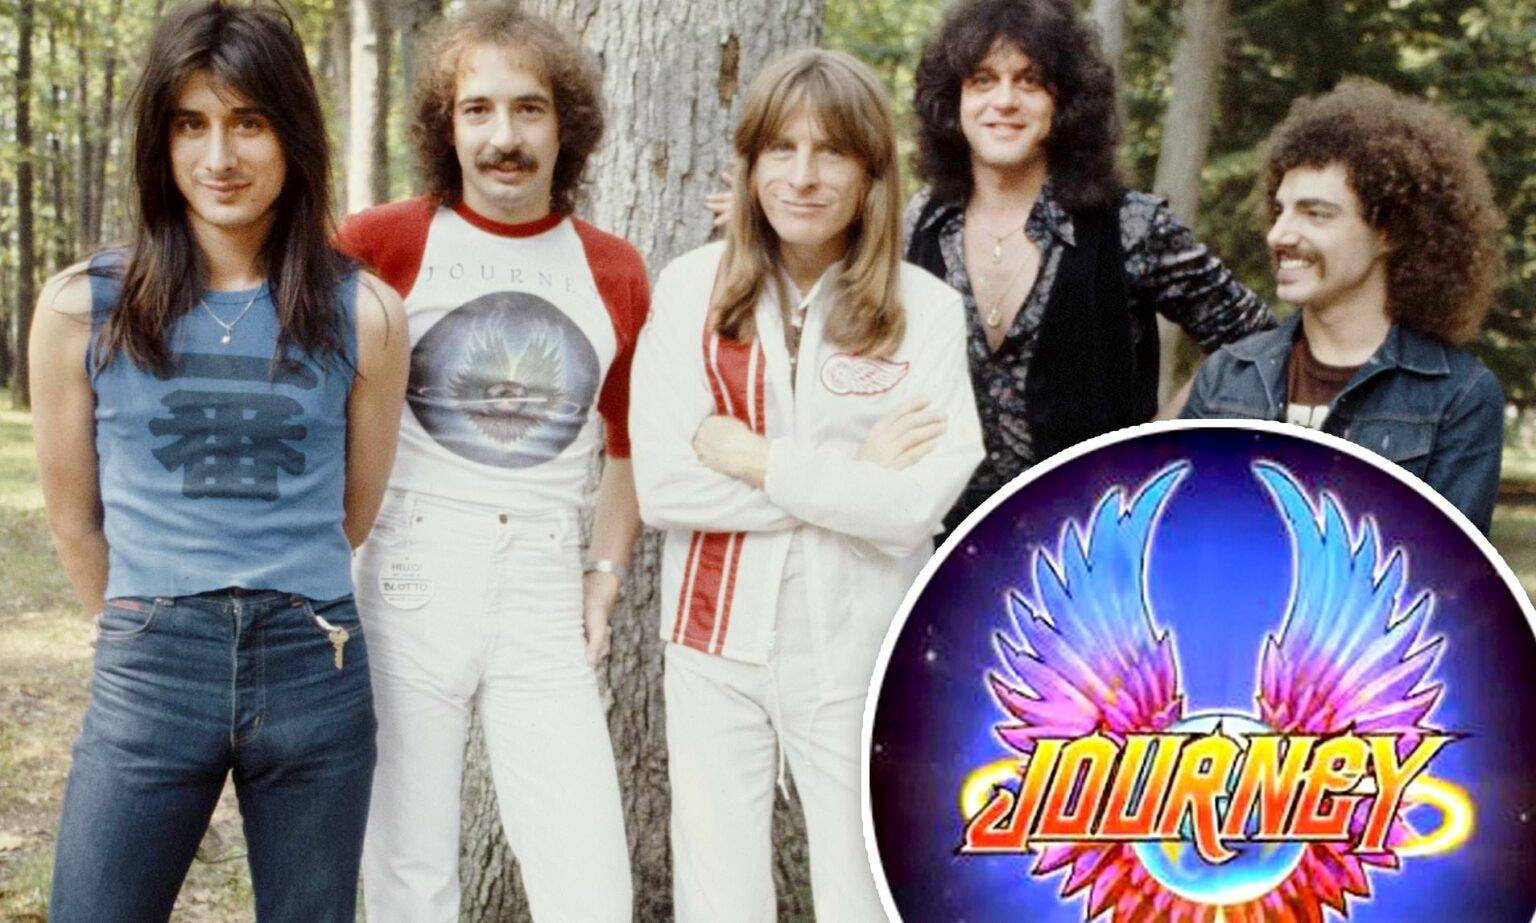 what year was journey popular